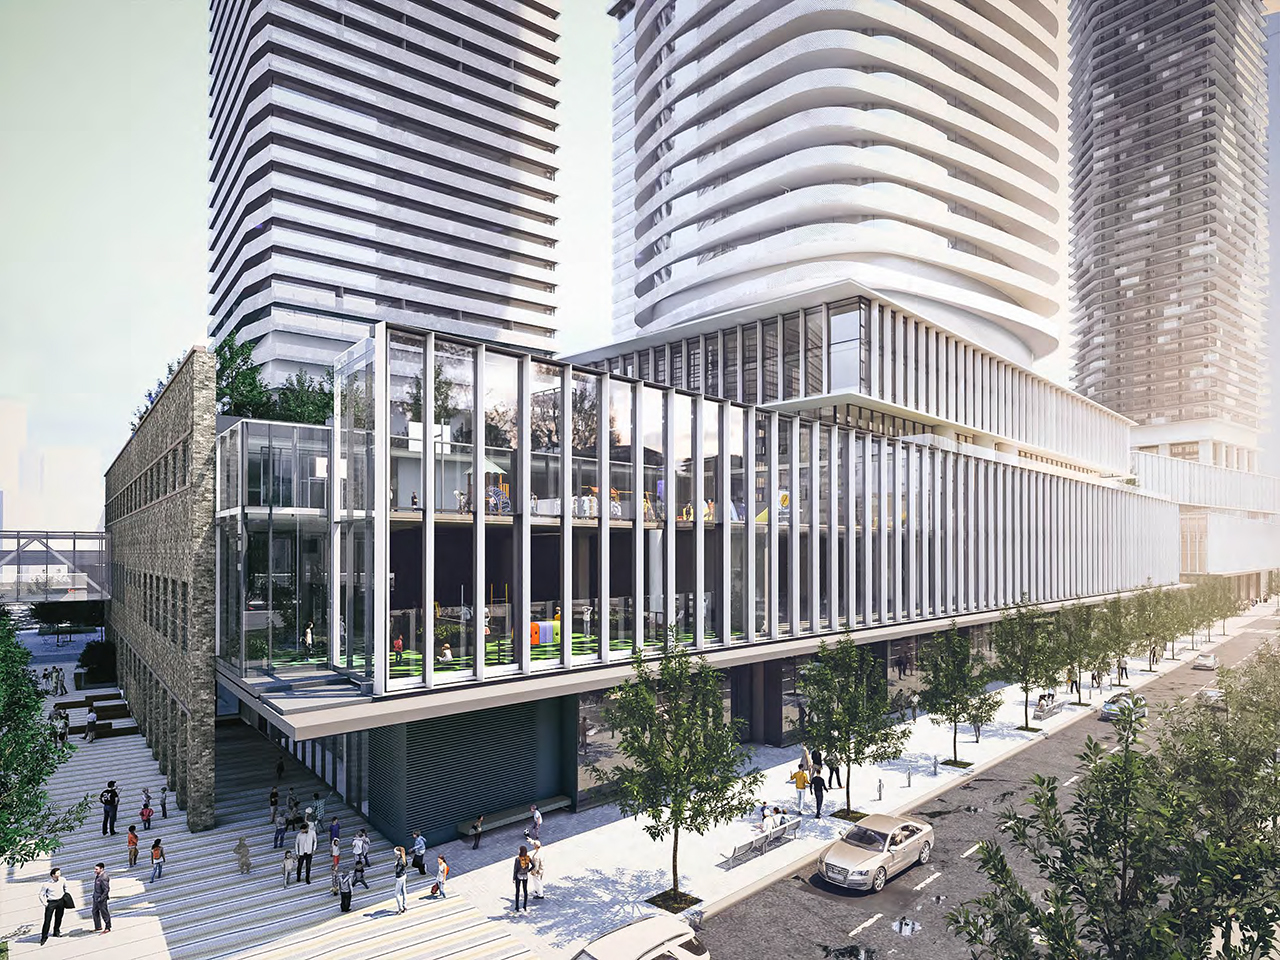 2022 In Review: Menkes Advances Project Pipeline, Earning Awards on the Way  | UrbanToronto